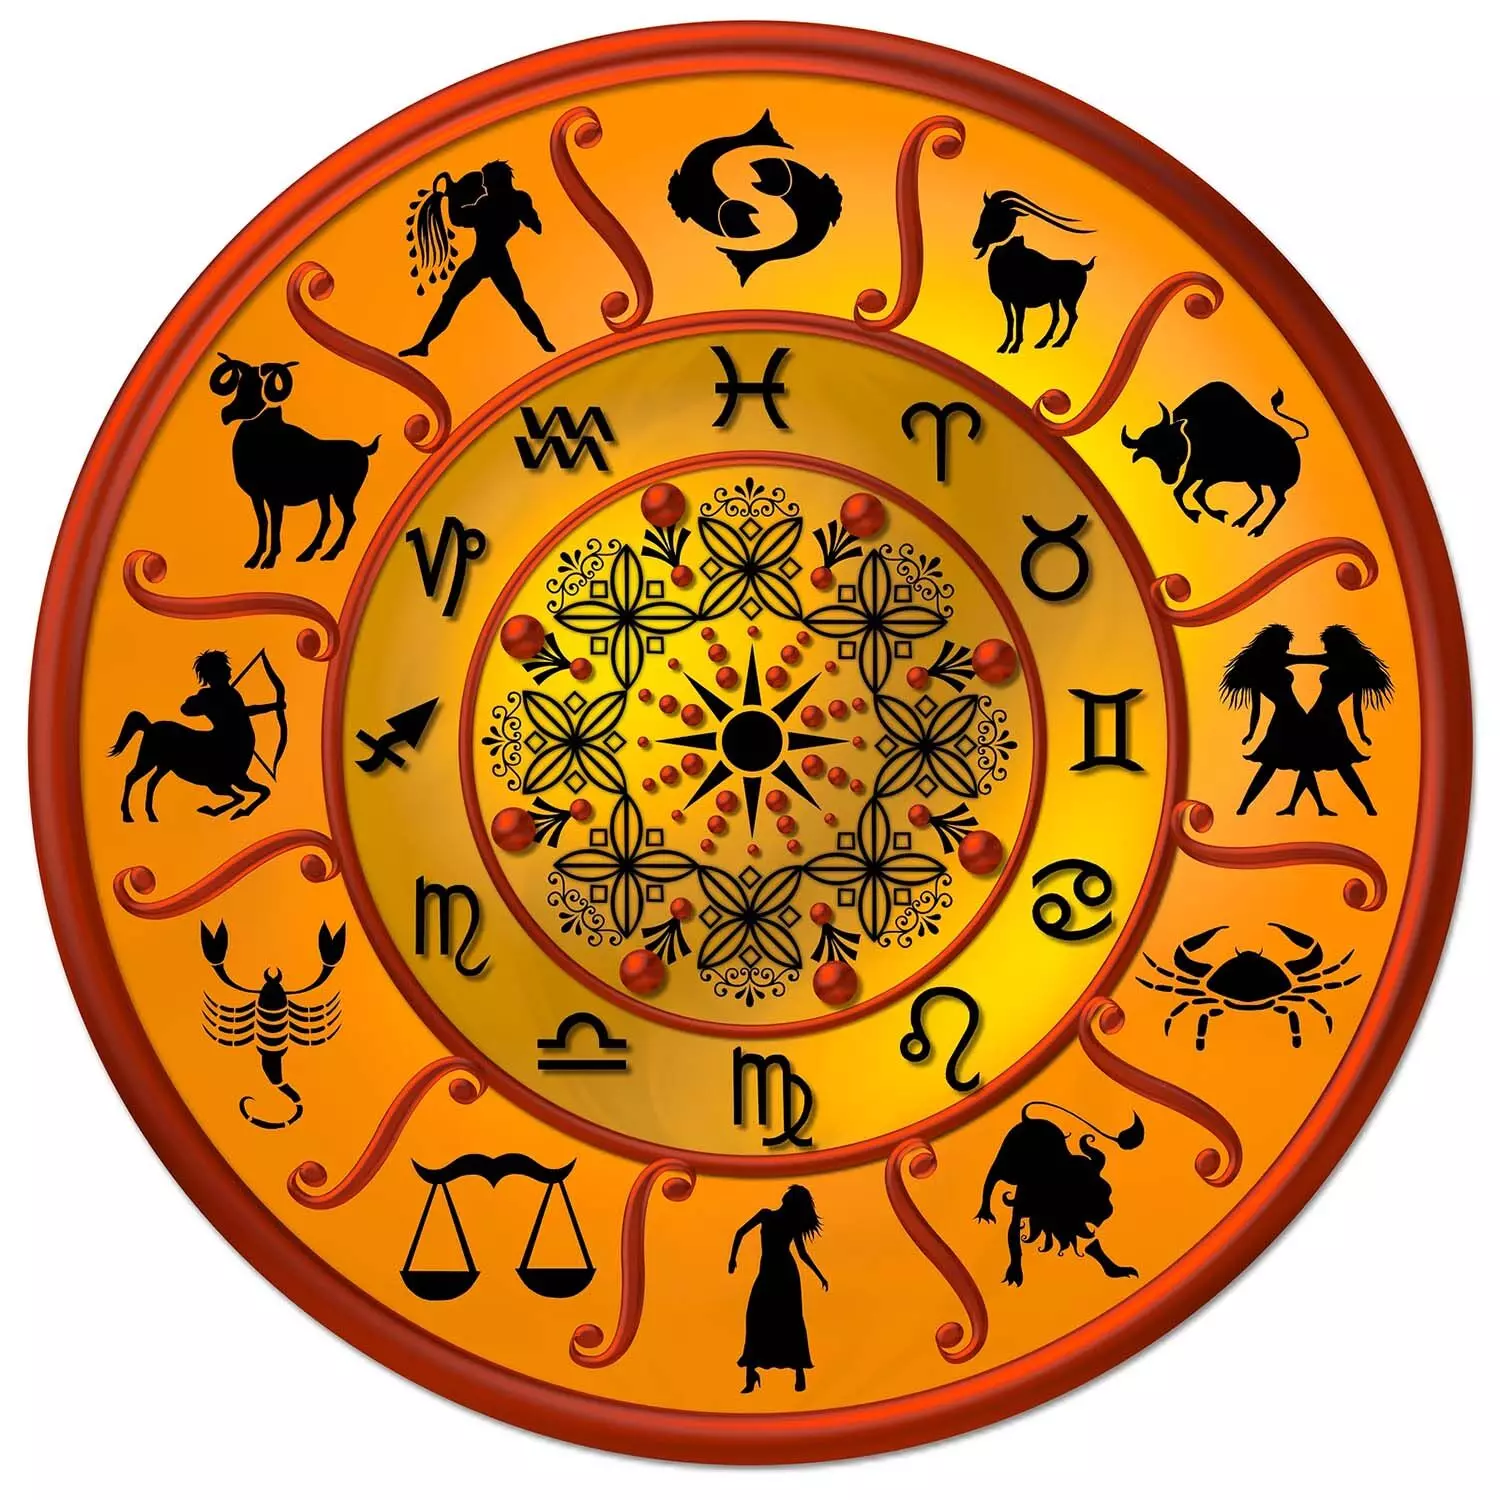 30 June – Know your todays horoscope